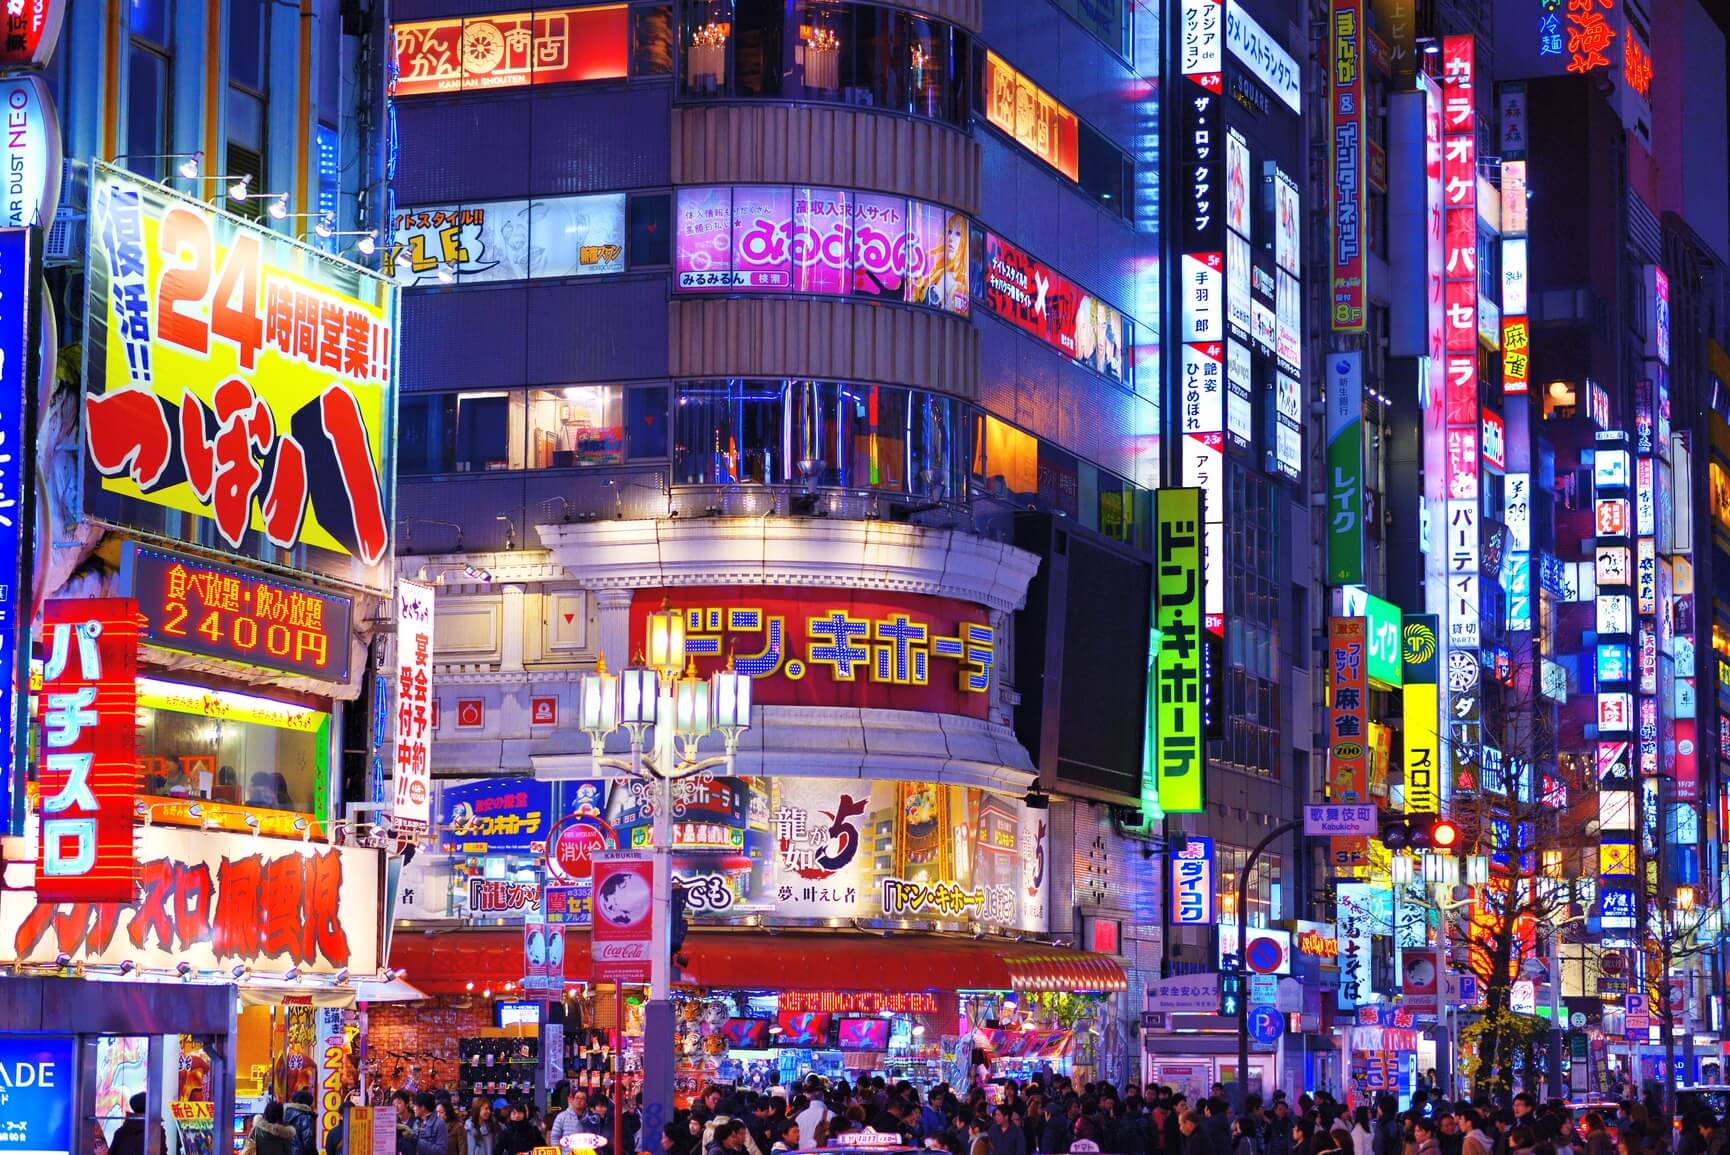 ⚠️ ERROR FARE ⚠️ Los Angeles to Tokyo, Japan for only $252 roundtrip (Jun dates)